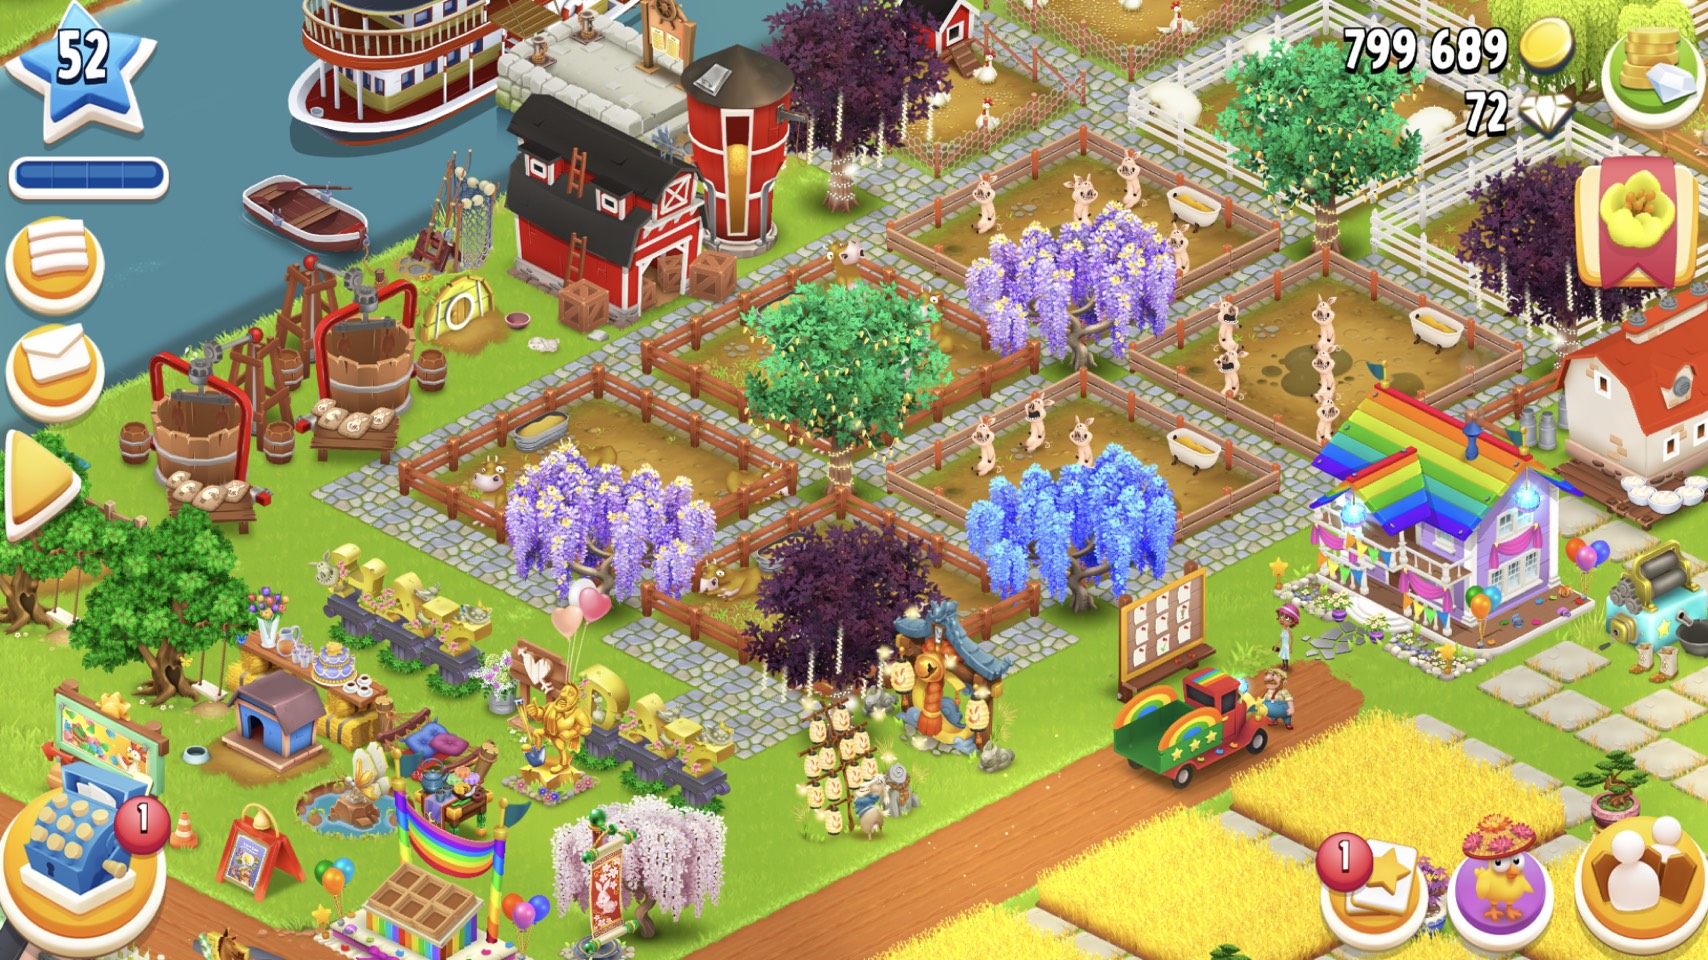 Level 52 barn 3450-silo 1100. Town level 10. Good production machine, beautifully decorated with Hayday lettering  IN GAME